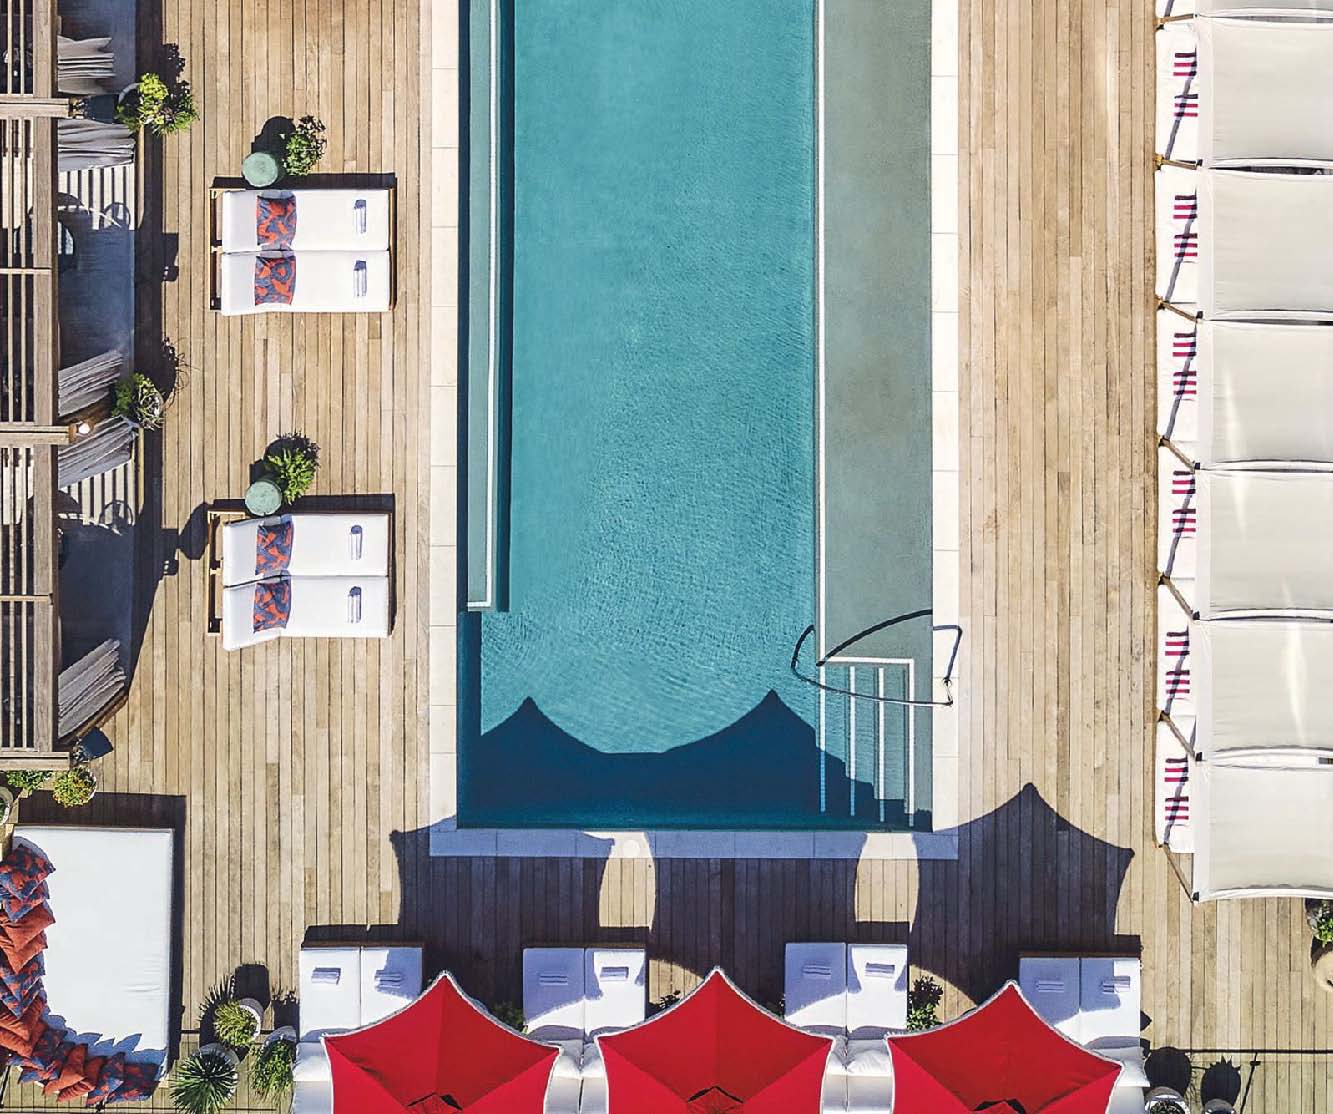 The pool at the Virgin Hotel touts a sizzling scene. PHOTO BY MARTIN BARRAUD/ISTOCK